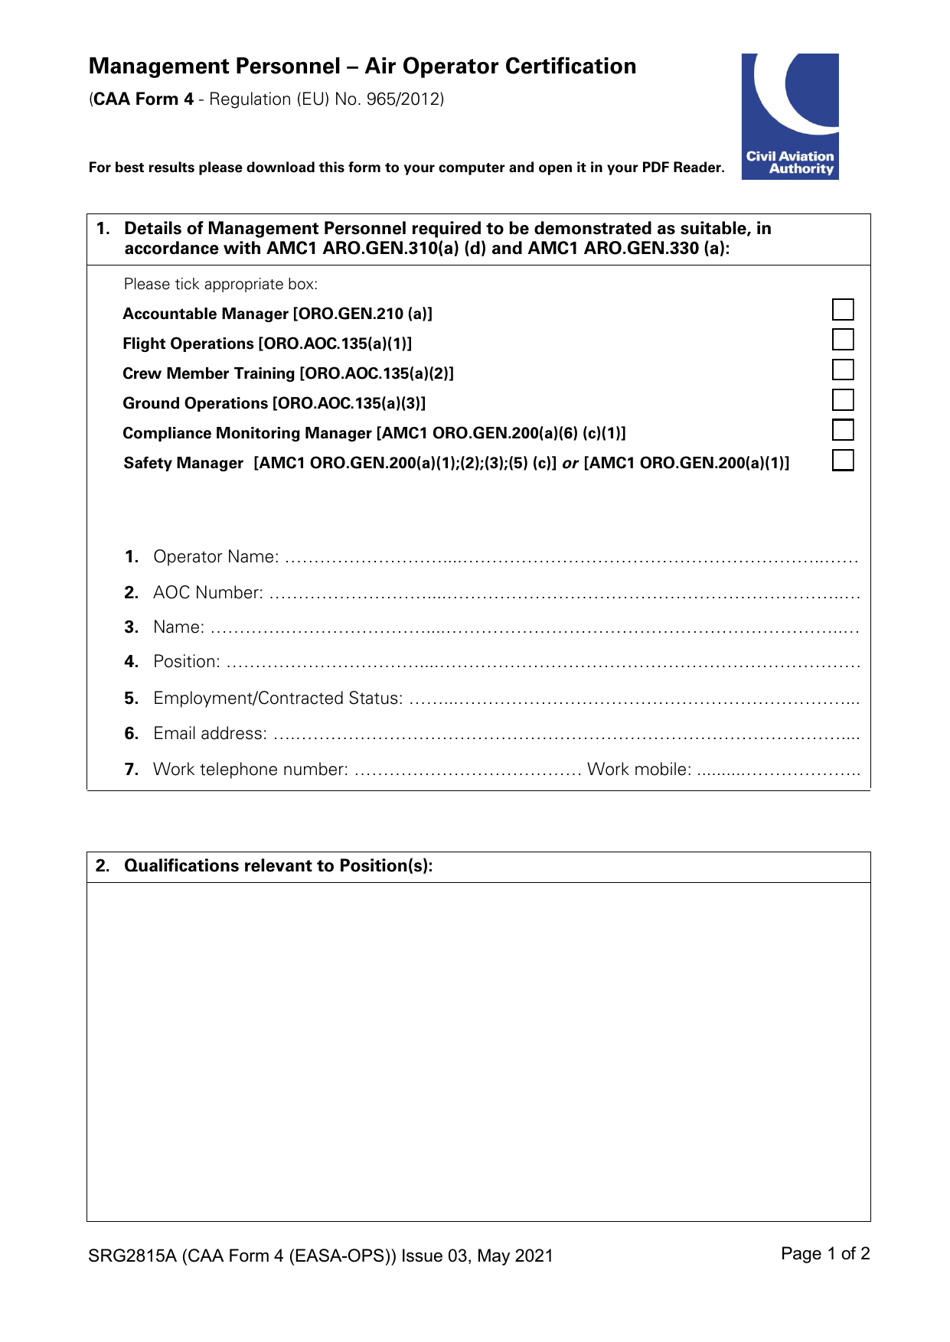 CAA Form 4 (EASA-OPS) (SRG2815A) Management Personnel - Air Operator Certification - United Kingdom, Page 1